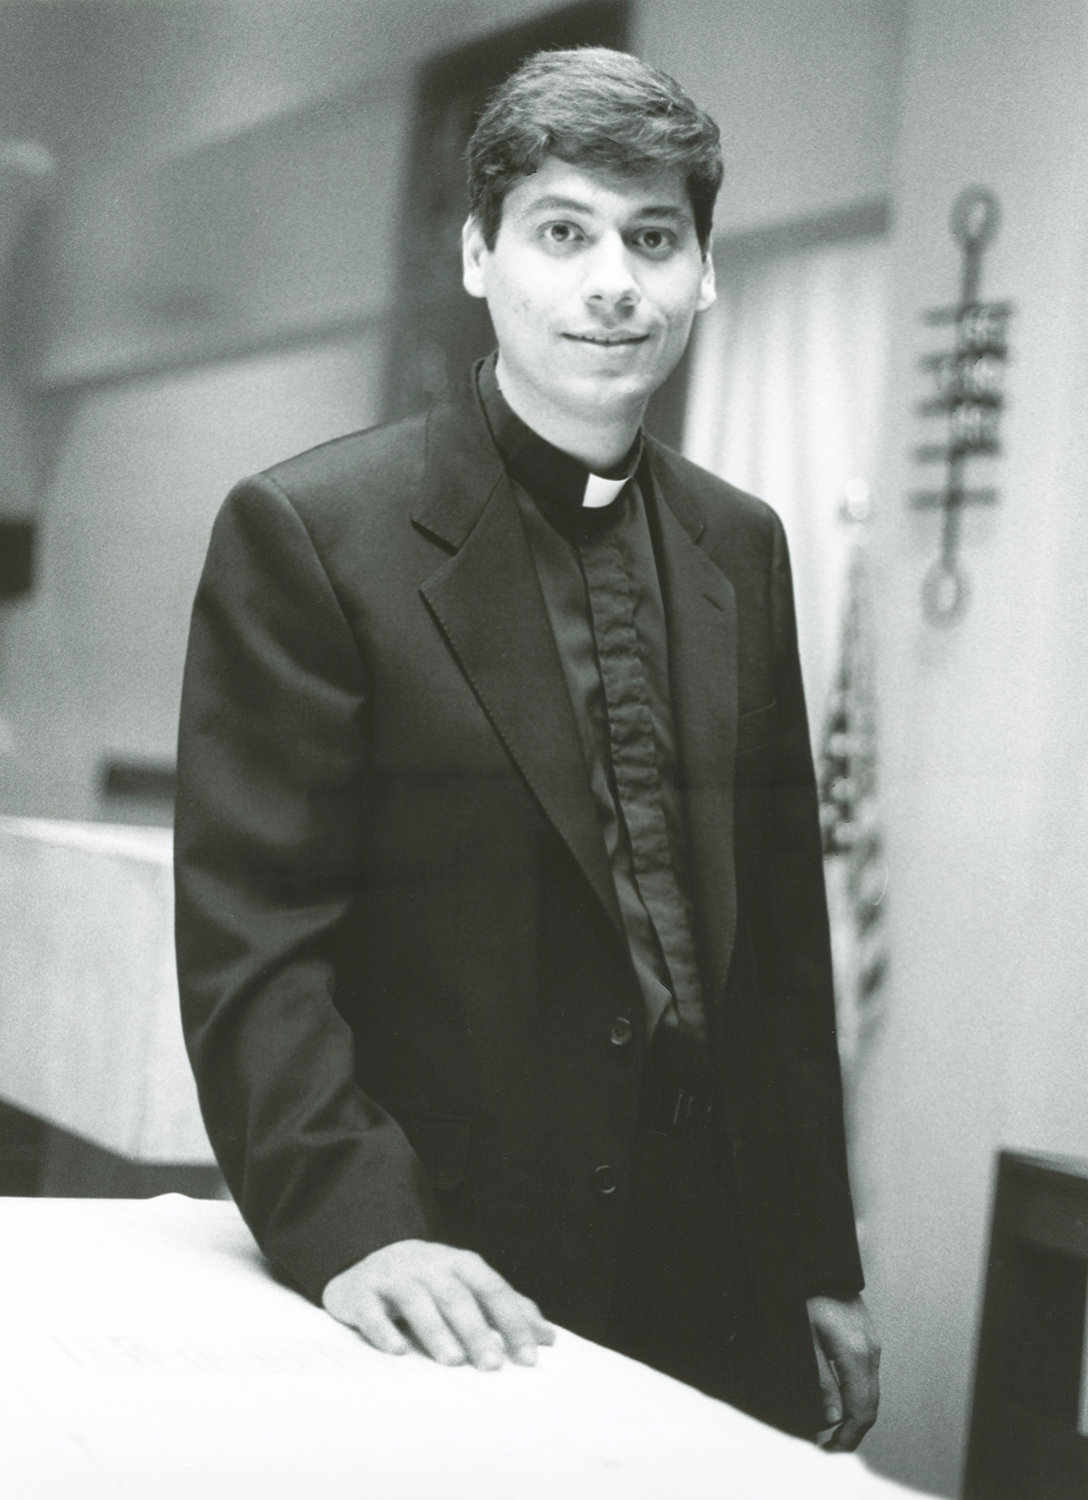 Then-Deacon John S. Bonnici is pictured in June 1991, shortly before his ordination to the priesthood.